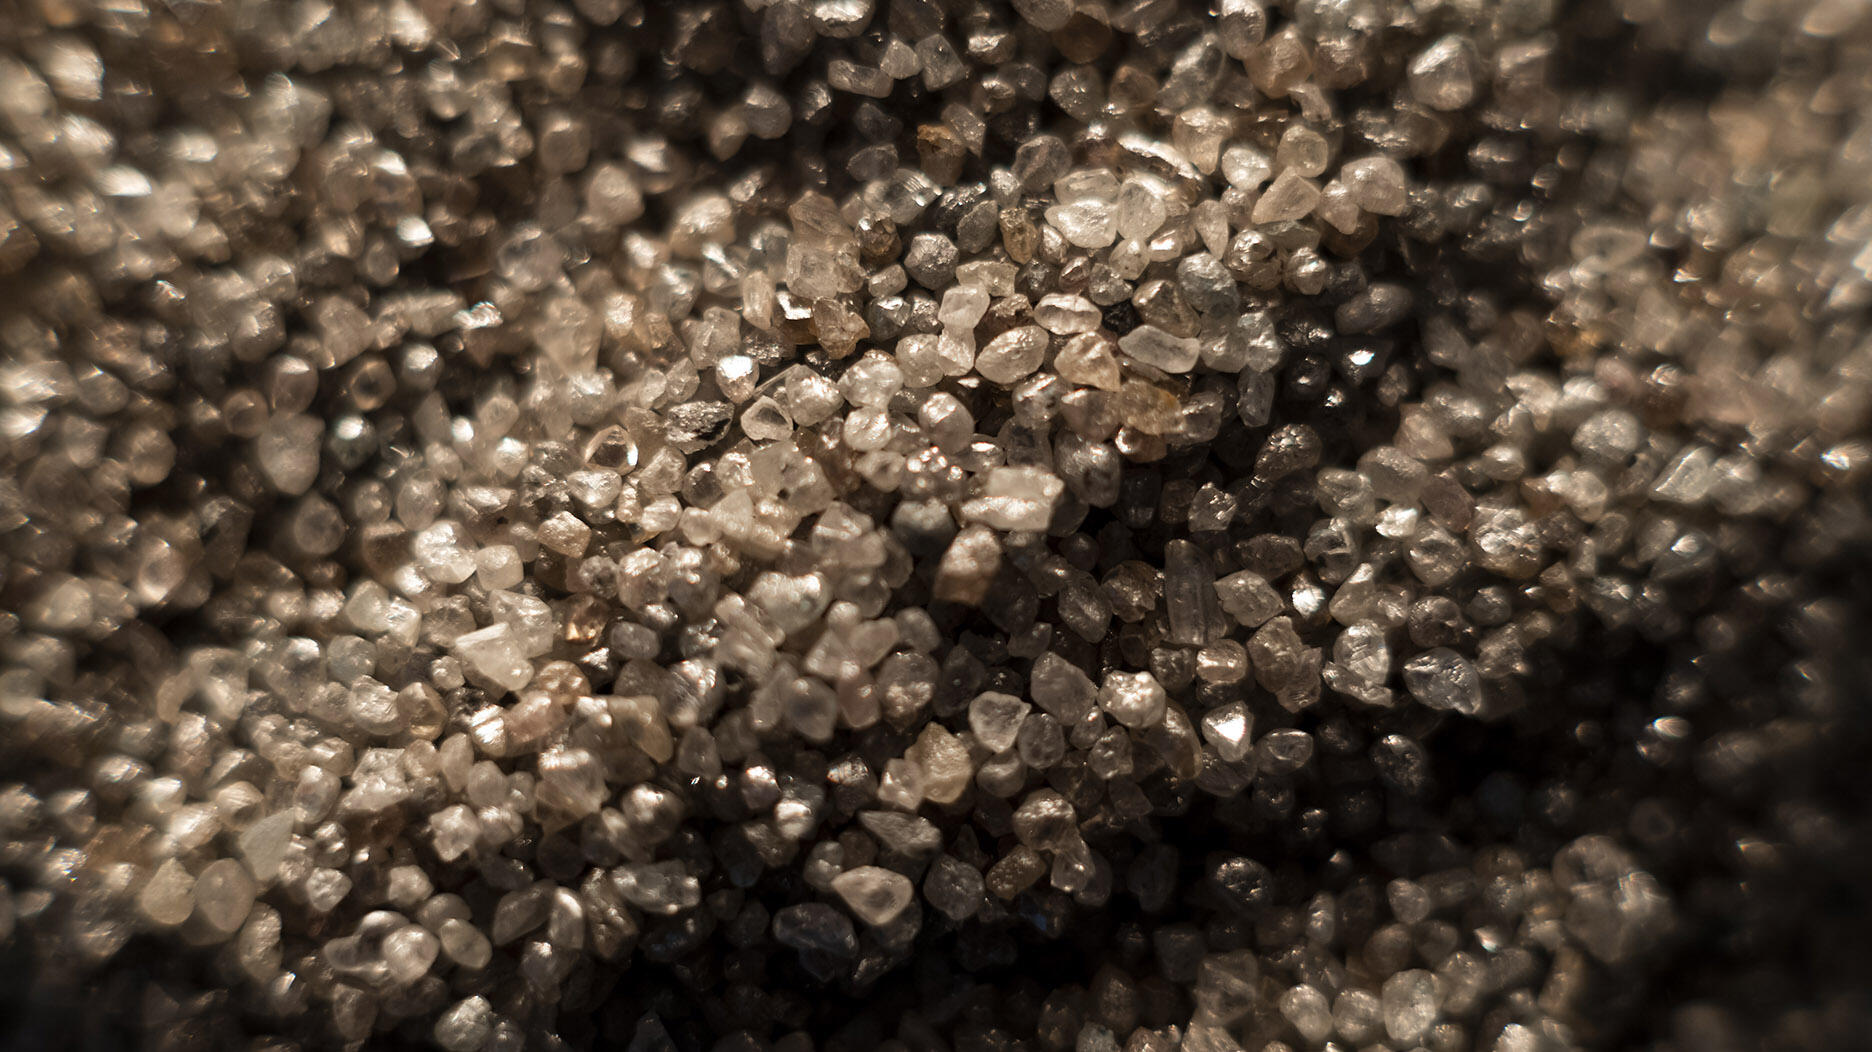 De Beers agrees to give Botswana more rough diamonds in new sales pact